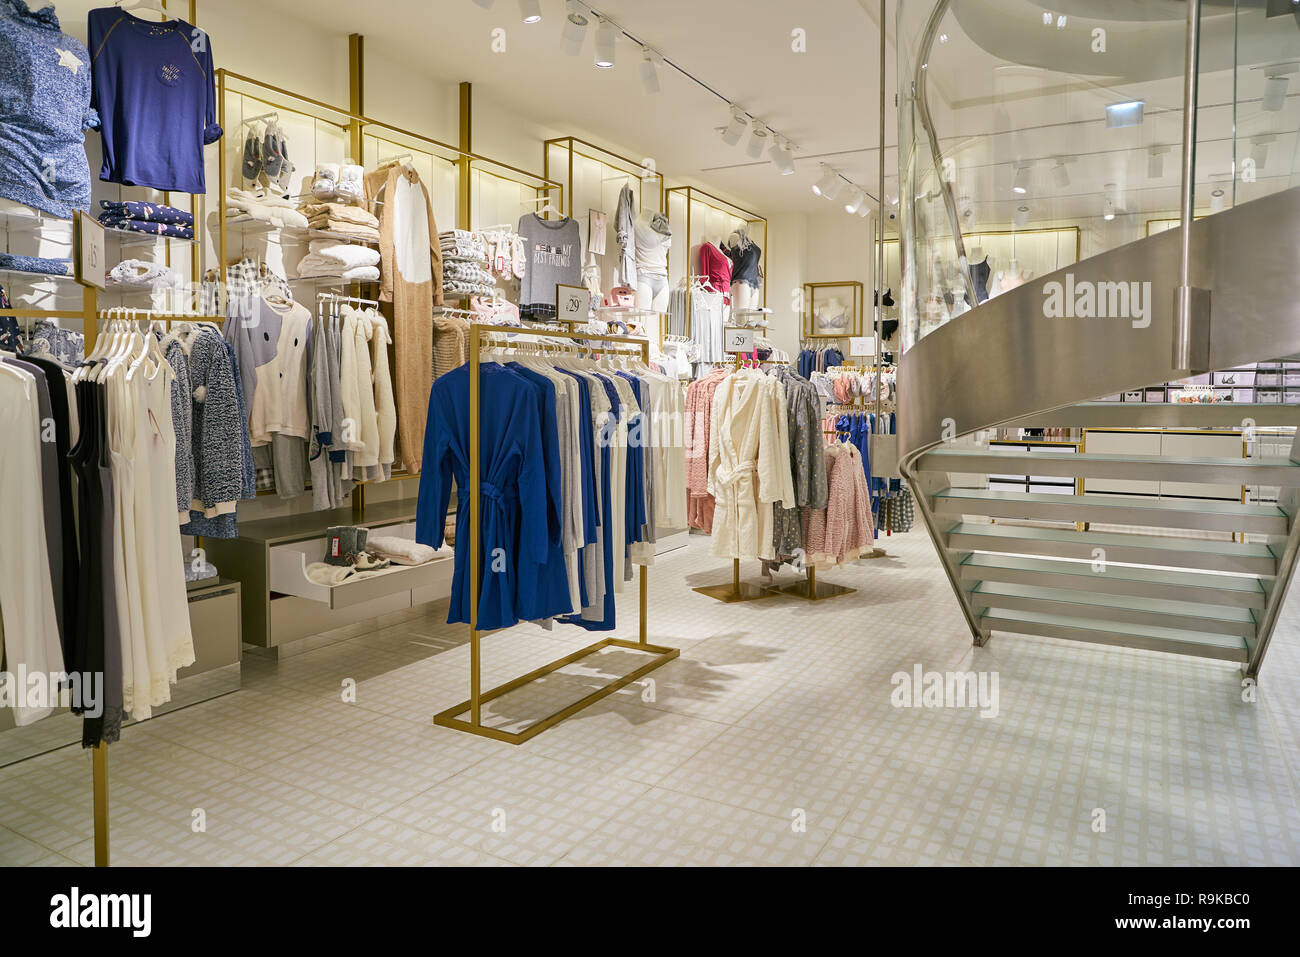 Yamamay Store High Resolution Stock Photography and Images - Alamy